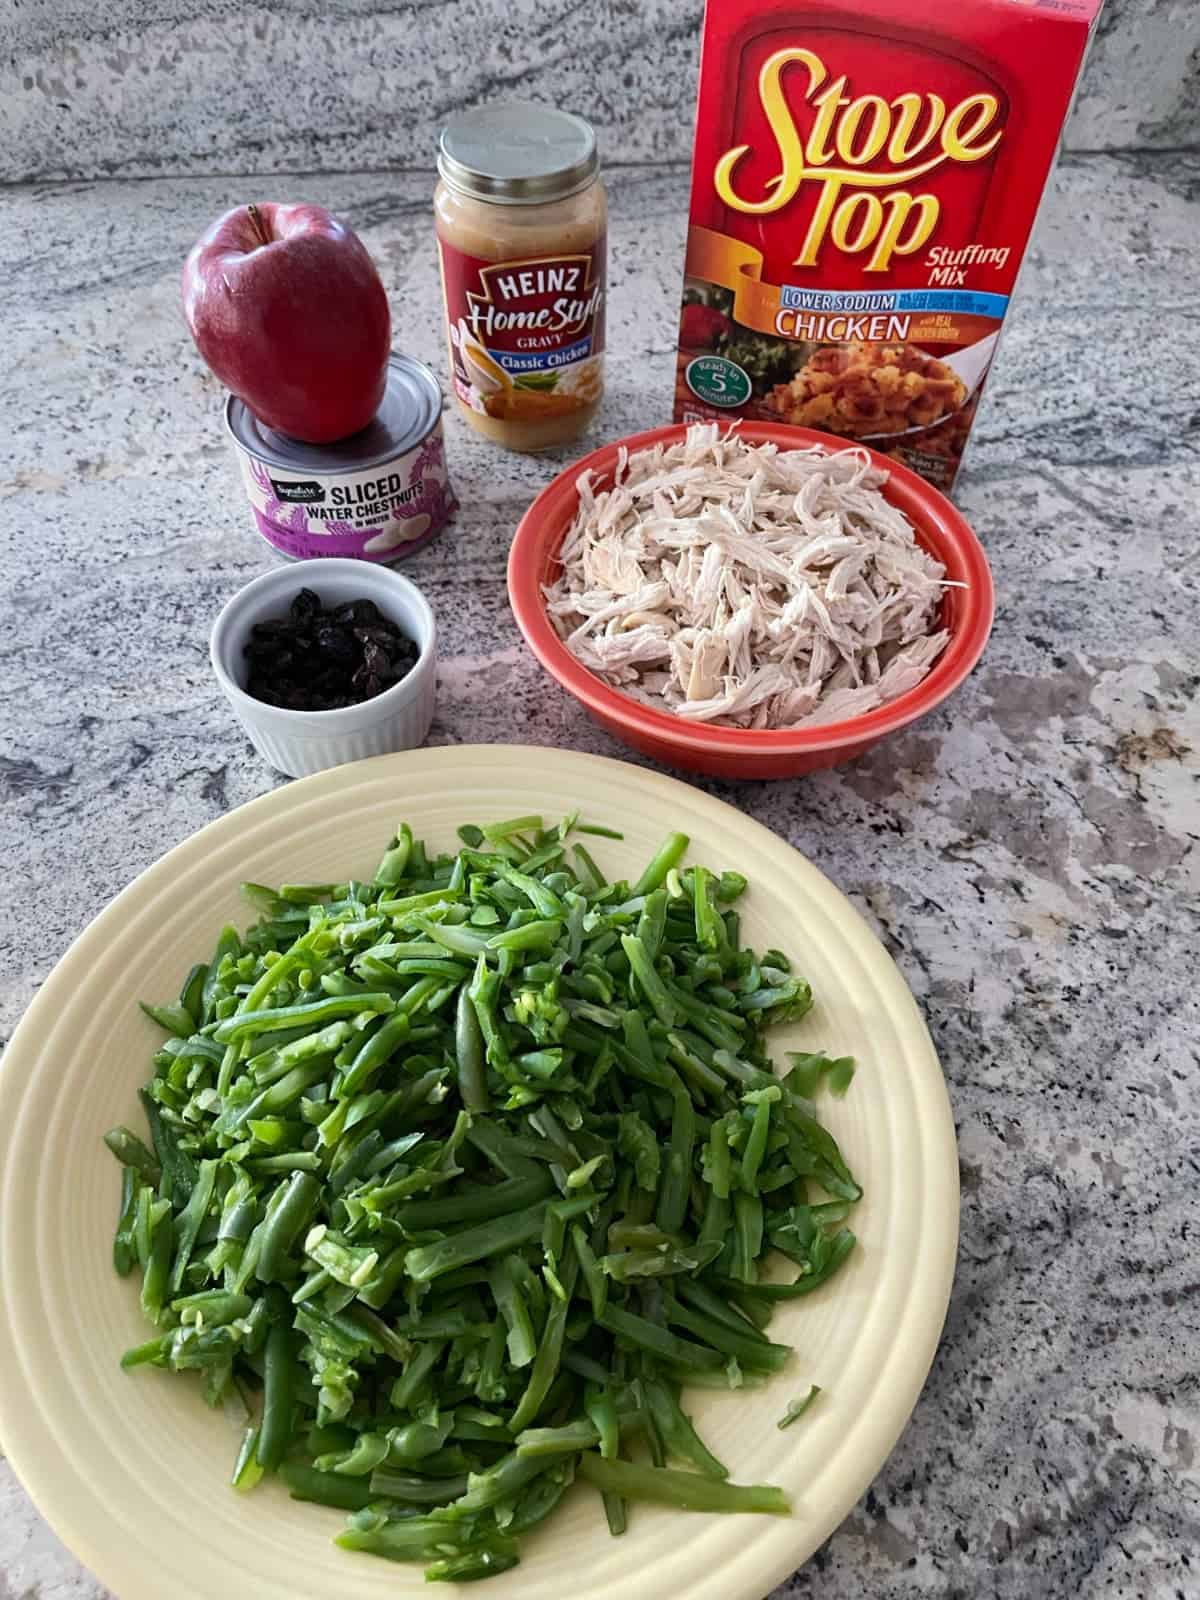 Stove Top chicken stuffing mix, shredded chicken breast, french-style green beans, raisin, apple and chicken gravy on granite counter.